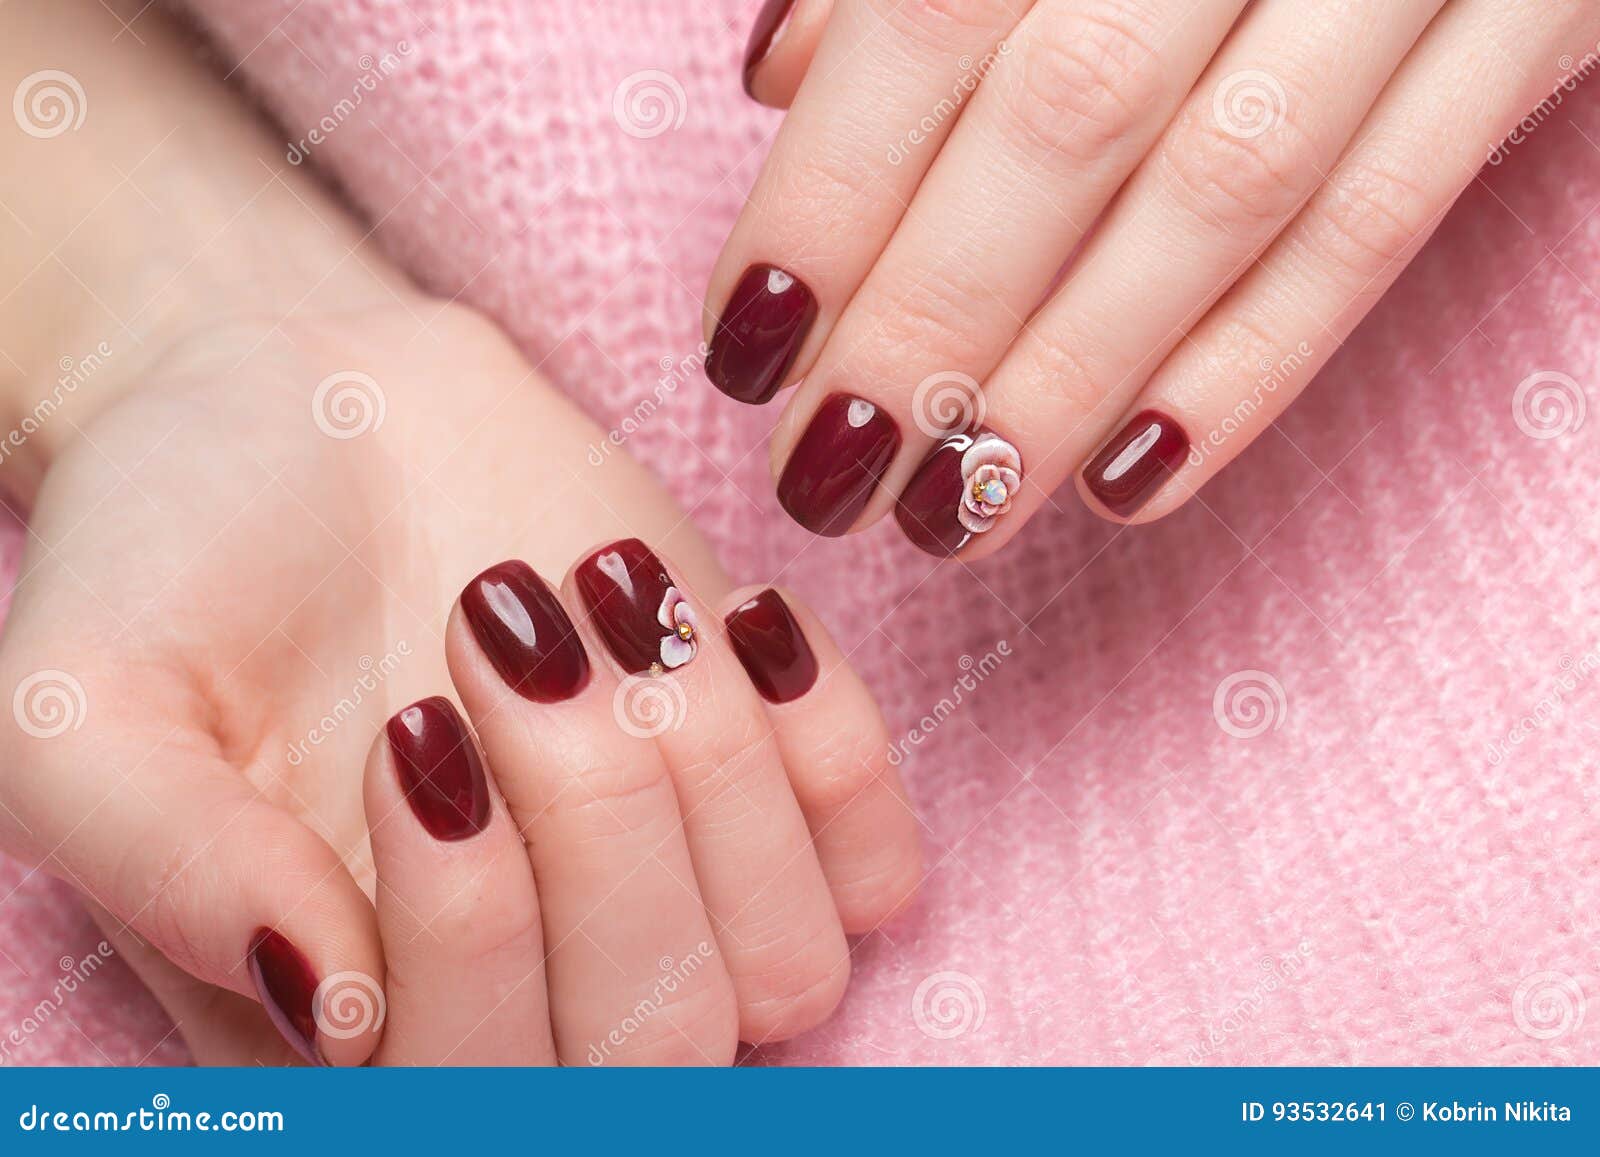 Shot Beautiful Manicure with Flowers on Female Fingers. Nails Design ...